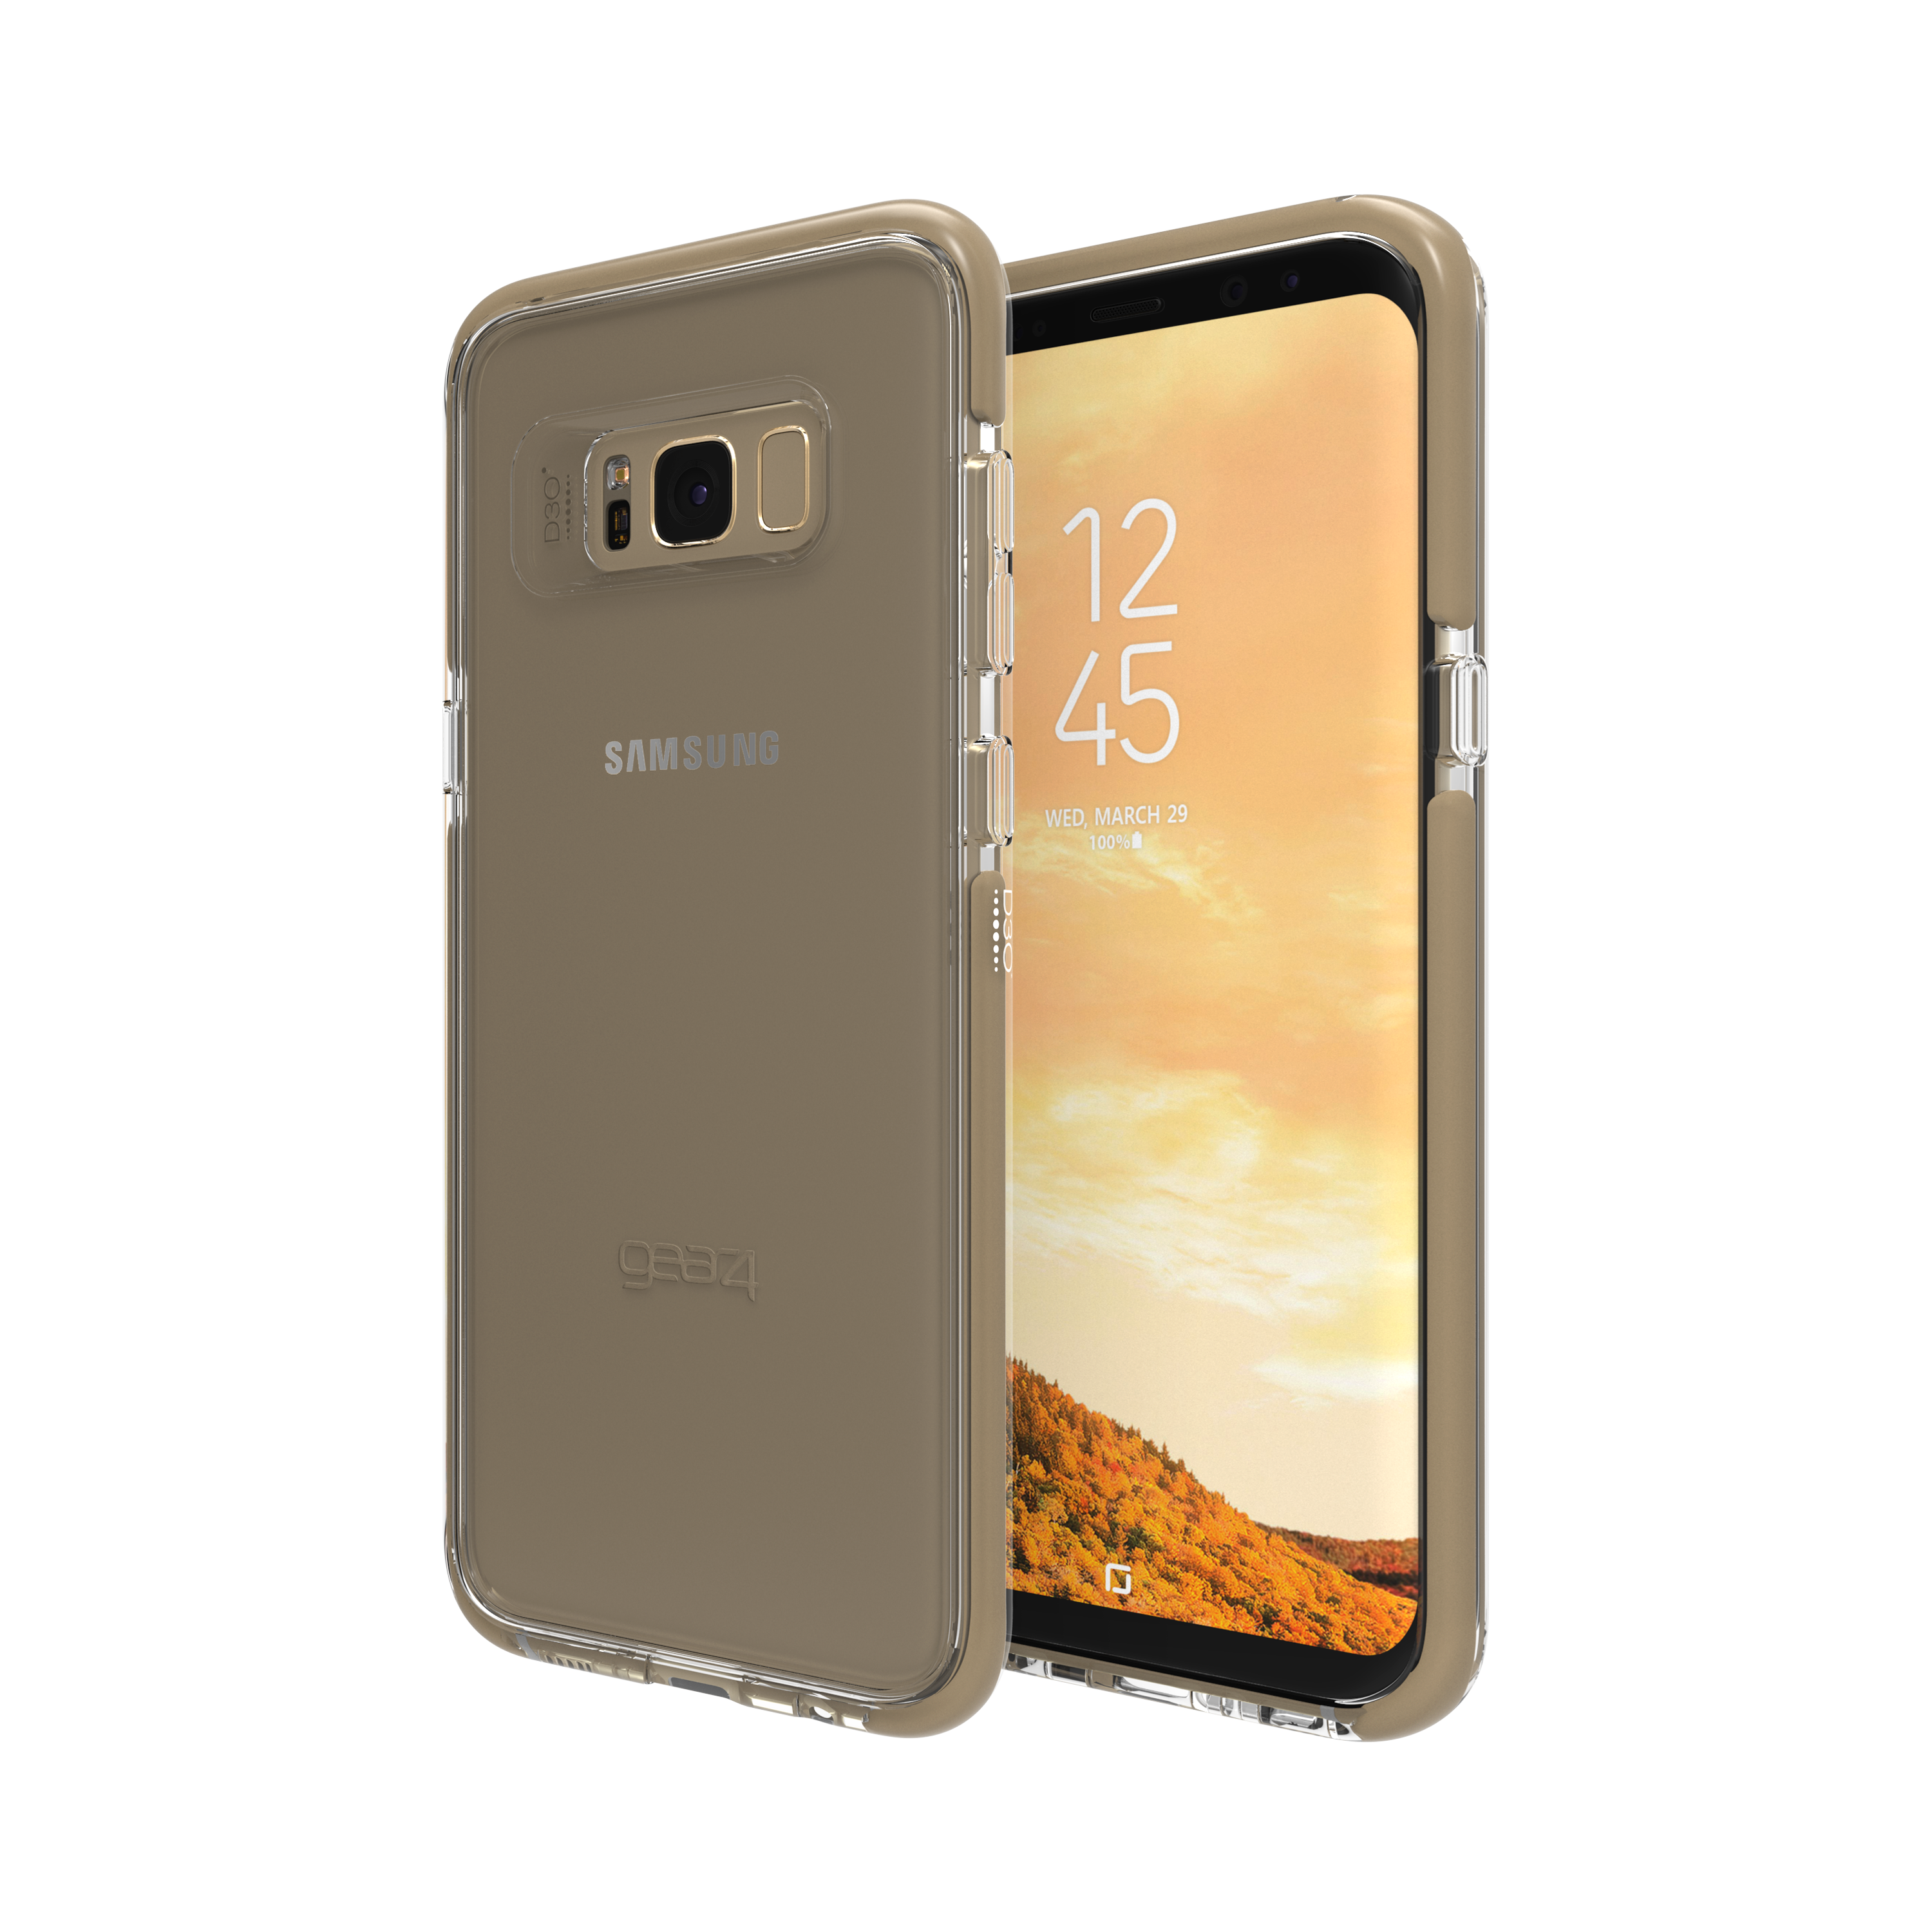 GALAXY Piccadilly, Backcover, SAMSUNG, S8+, GEAR4 GOLD